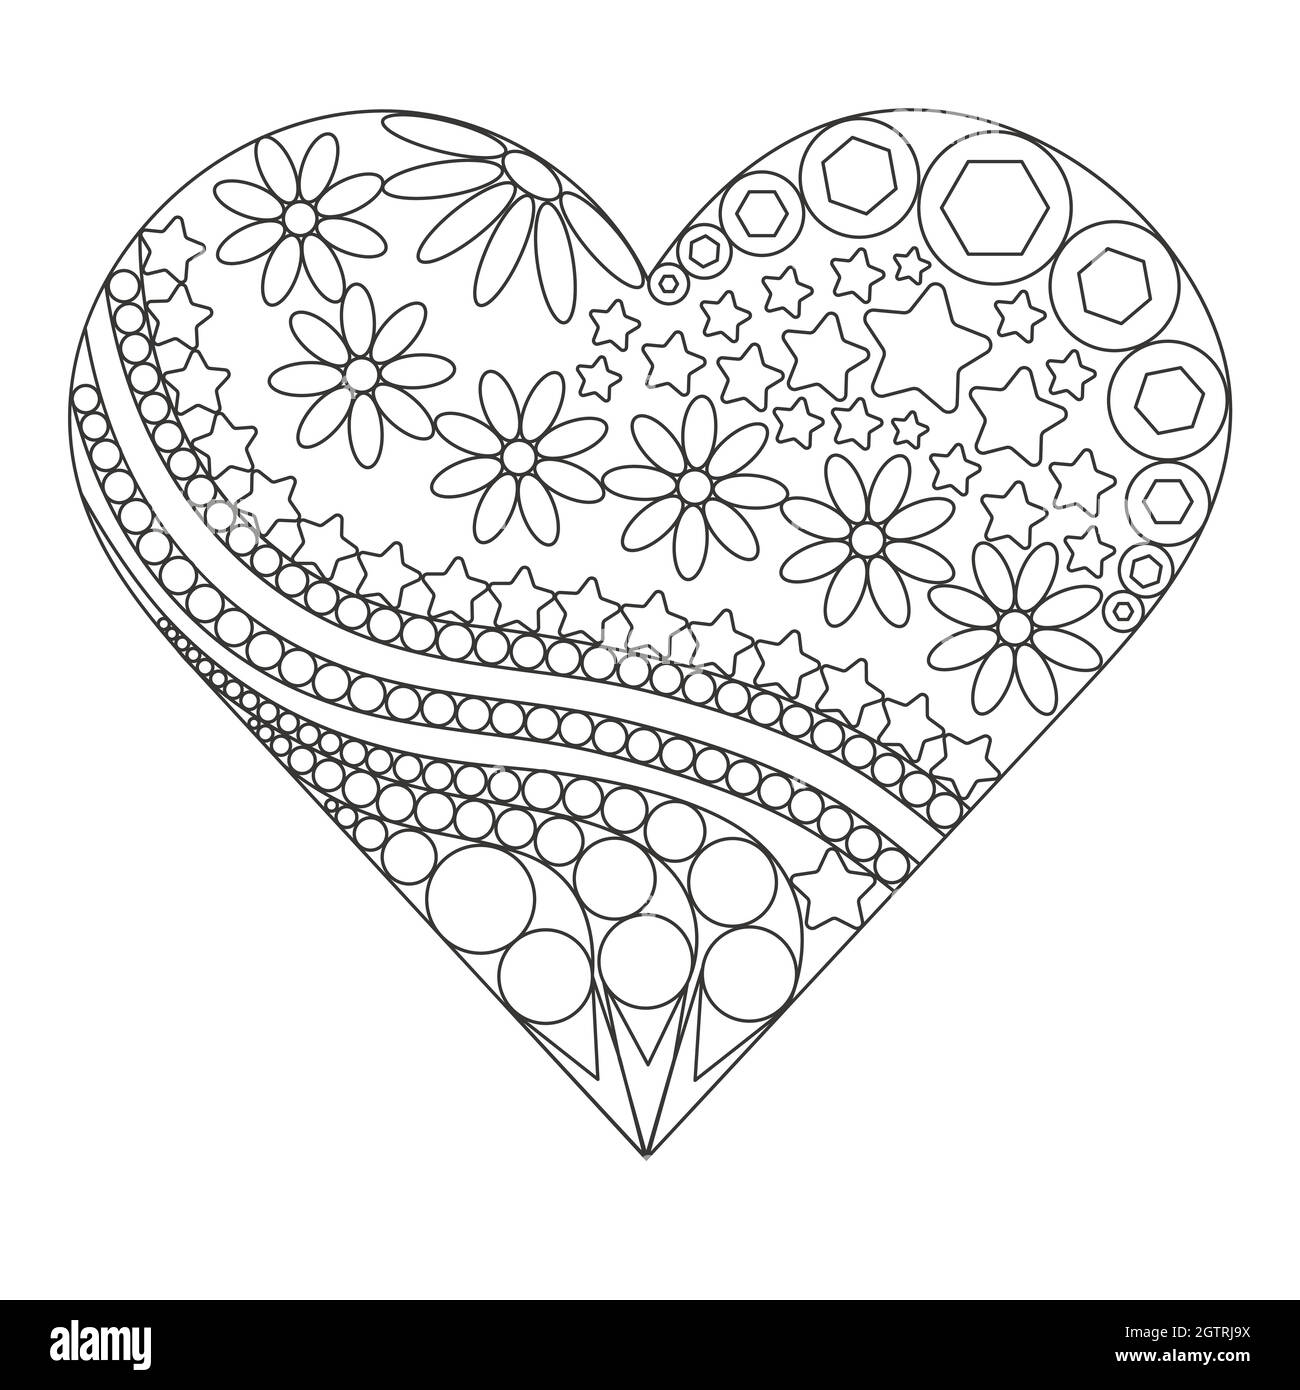 Heart filled with flowers and patterns, vector. Stock Vector